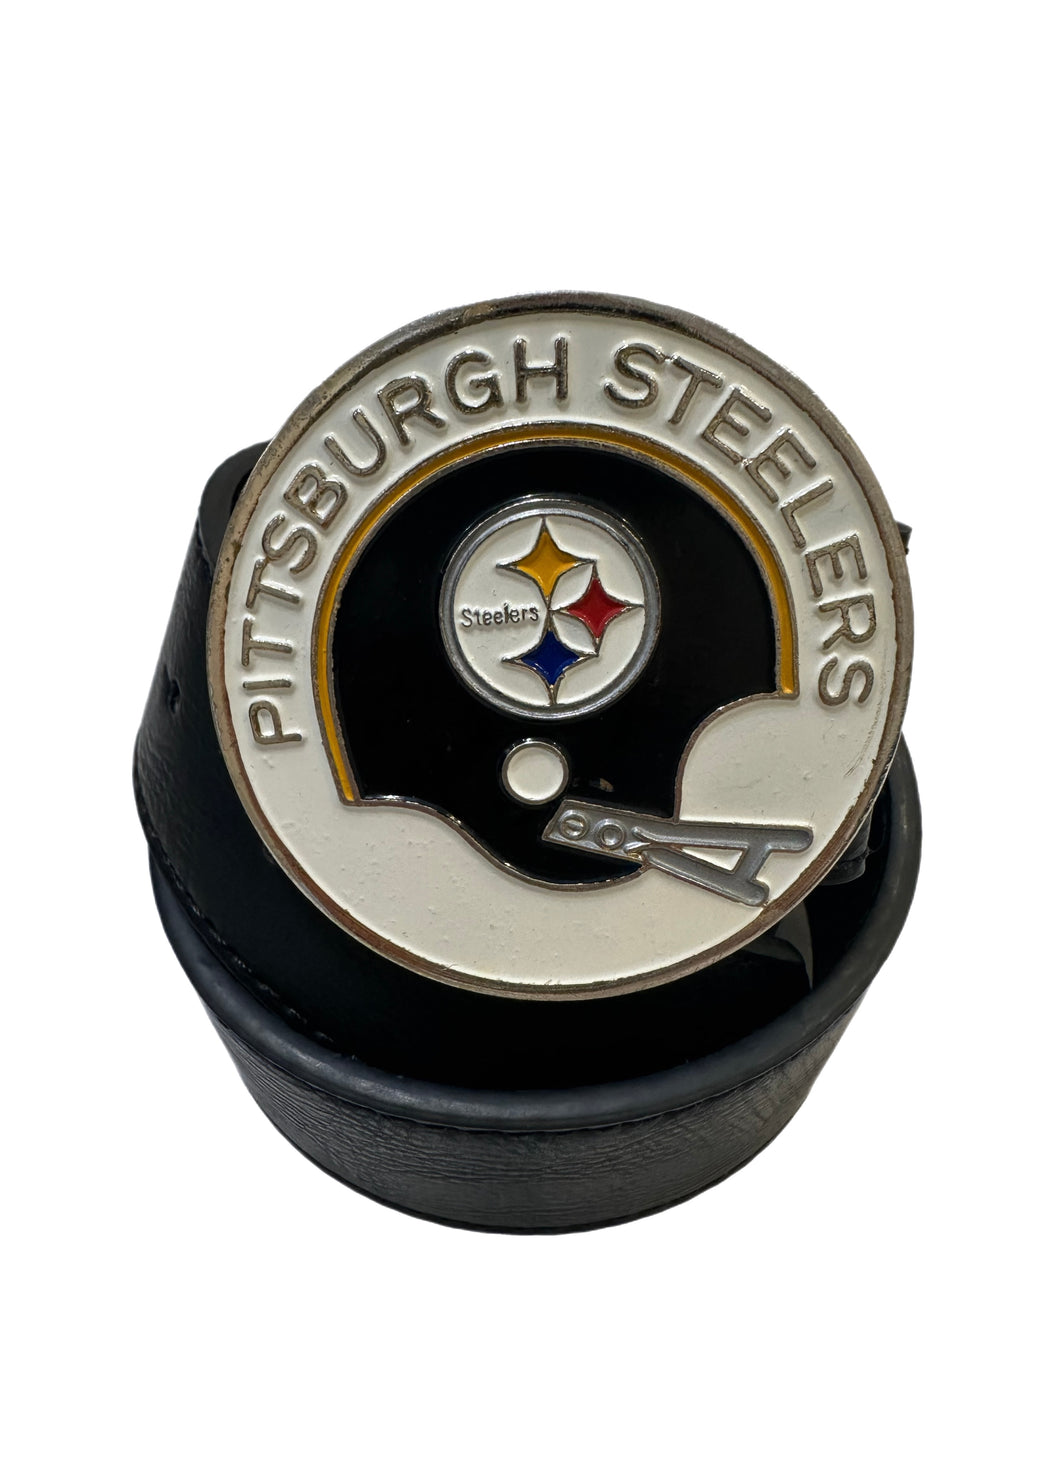 Pittsburgh Steelers, Football Vintage 1971 Belt Buckle with New Soft Leather Strap